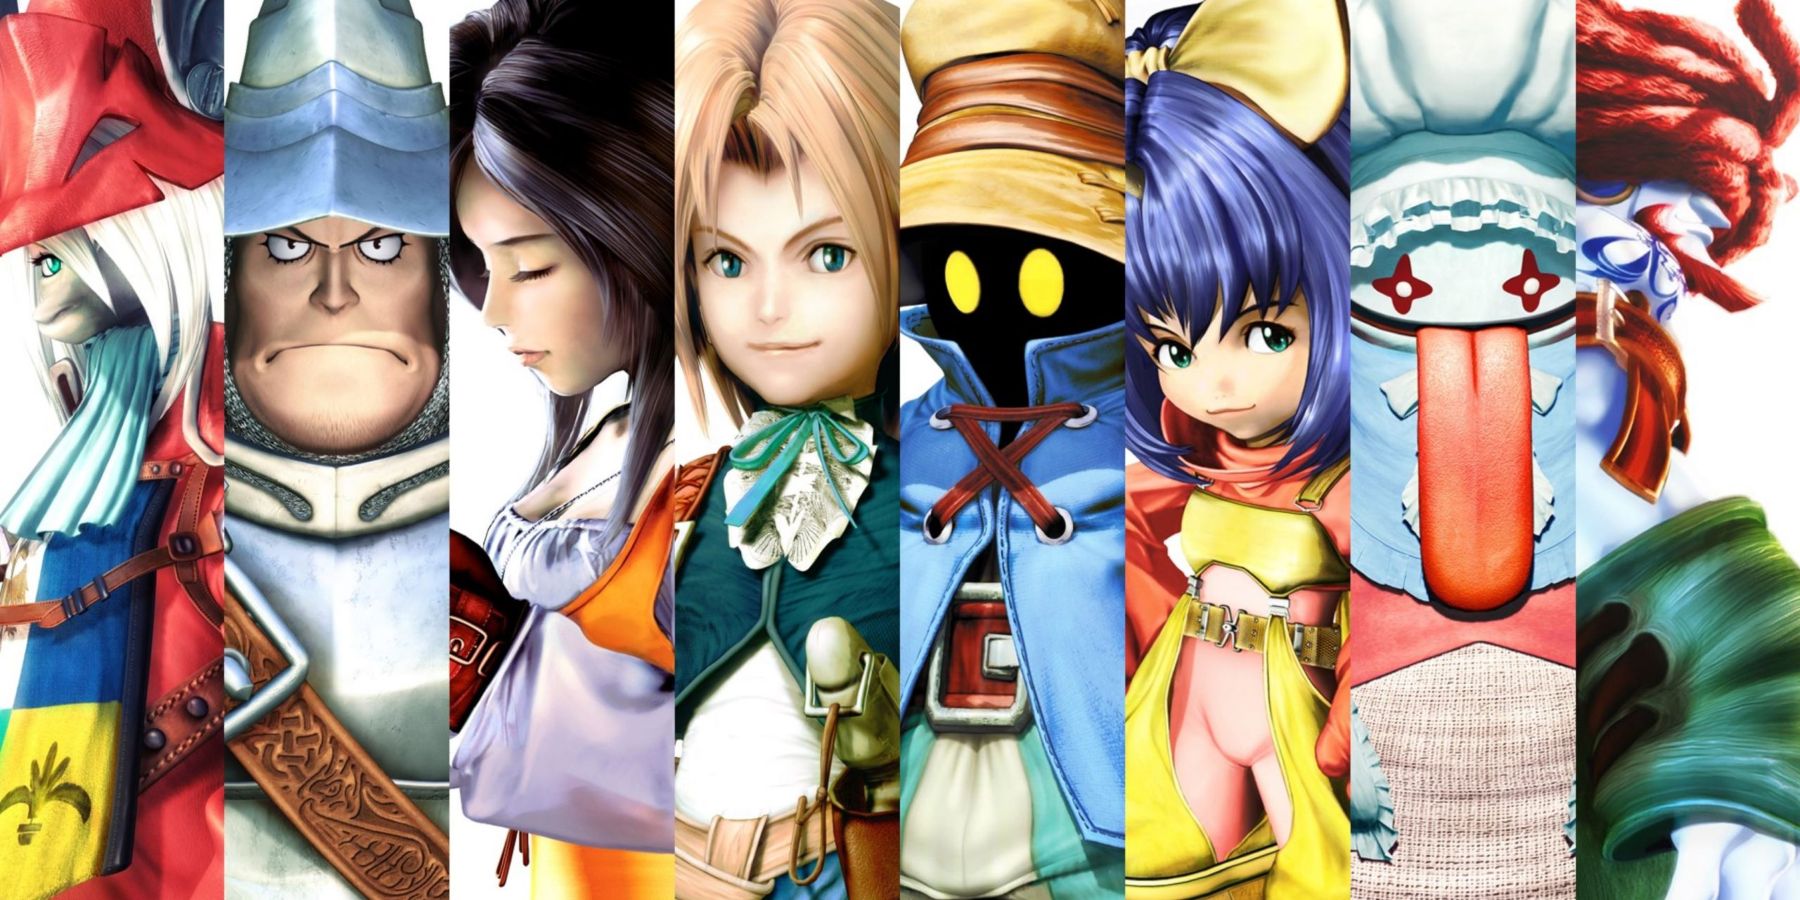 final fantasy 9 cast of playable characters